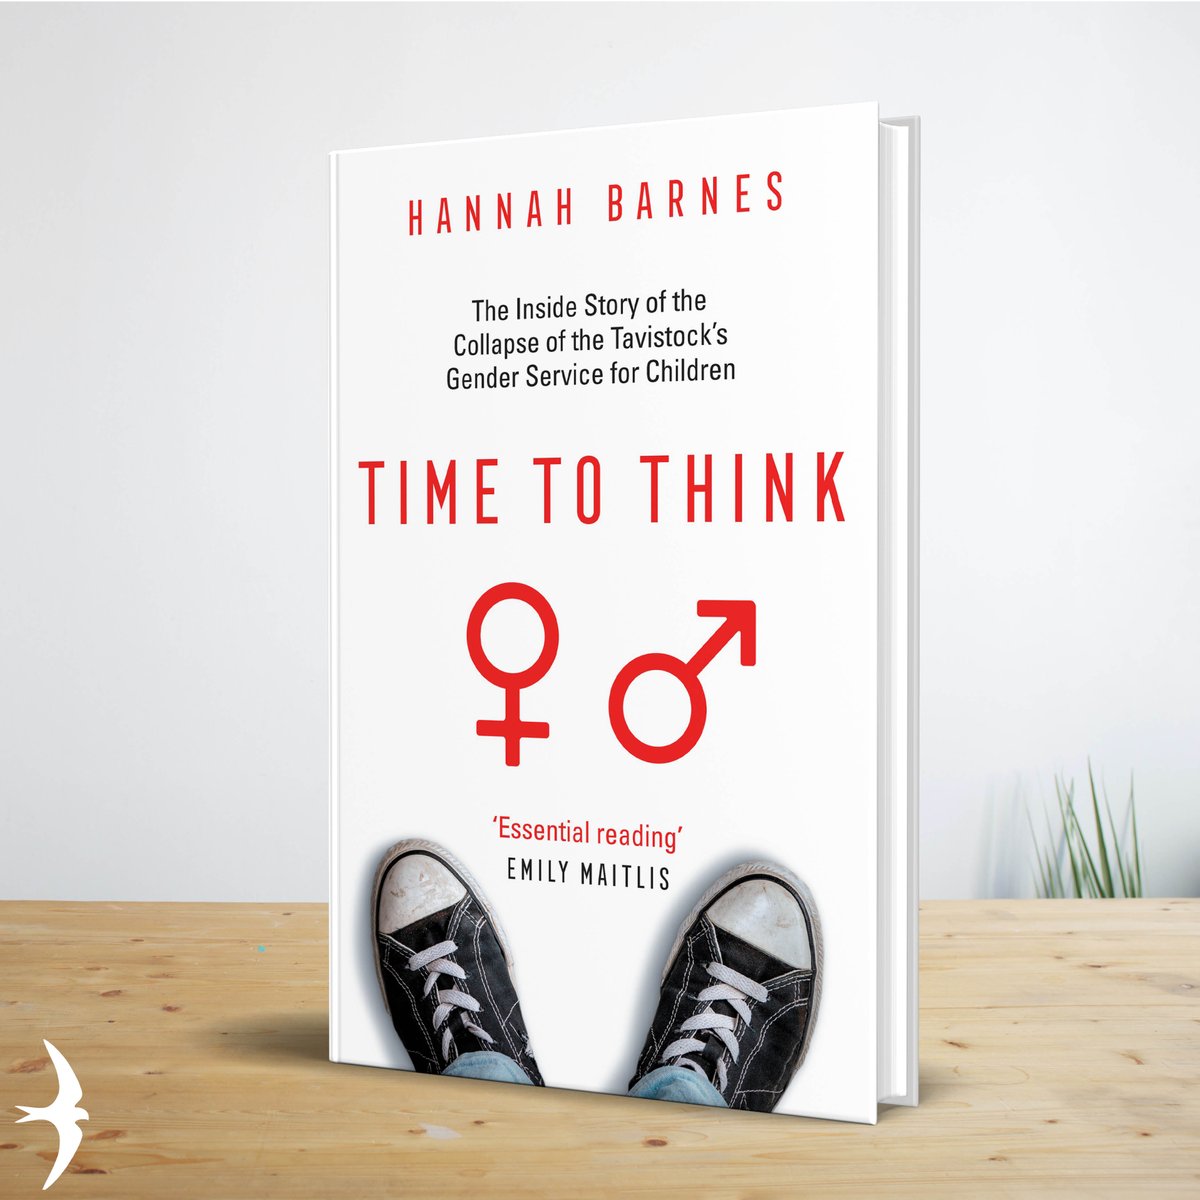 #TimetoThink, the @TheOrwellPrize shortlisted book by @hannahsbee, has been included in @thetimes Best Books of 2023 roundup.

'Sober, rhetoric-free and meticulously researched' @VictoriaPeckham 

Read the review: bit.ly/3qONcmn
Buy the book: bit.ly/TimetoThinkBook